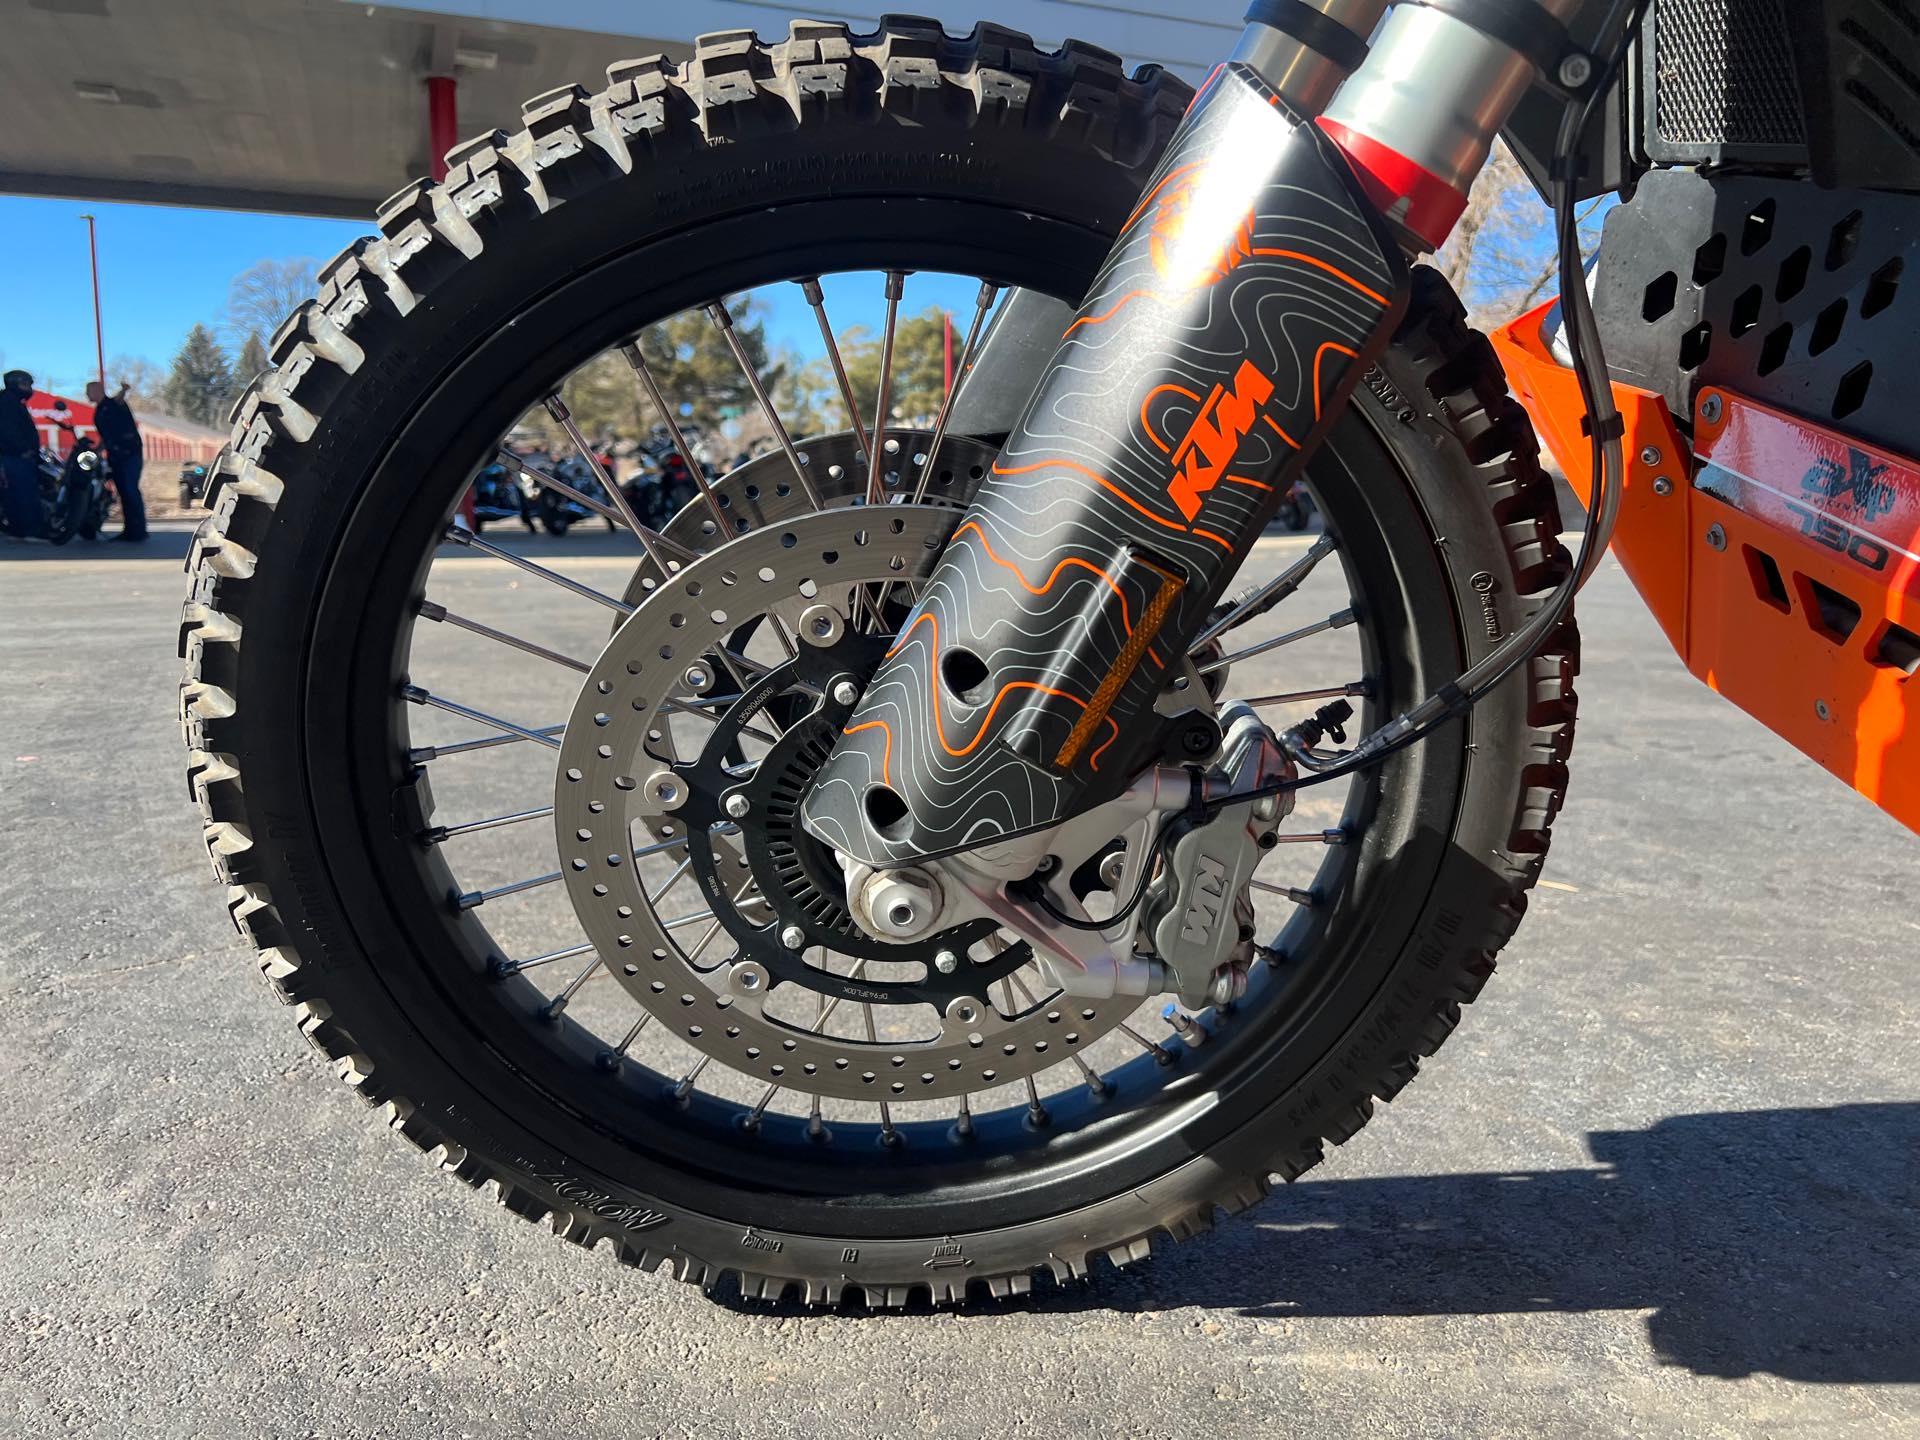 2020 KTM Adventure 790 R at Aces Motorcycles - Fort Collins